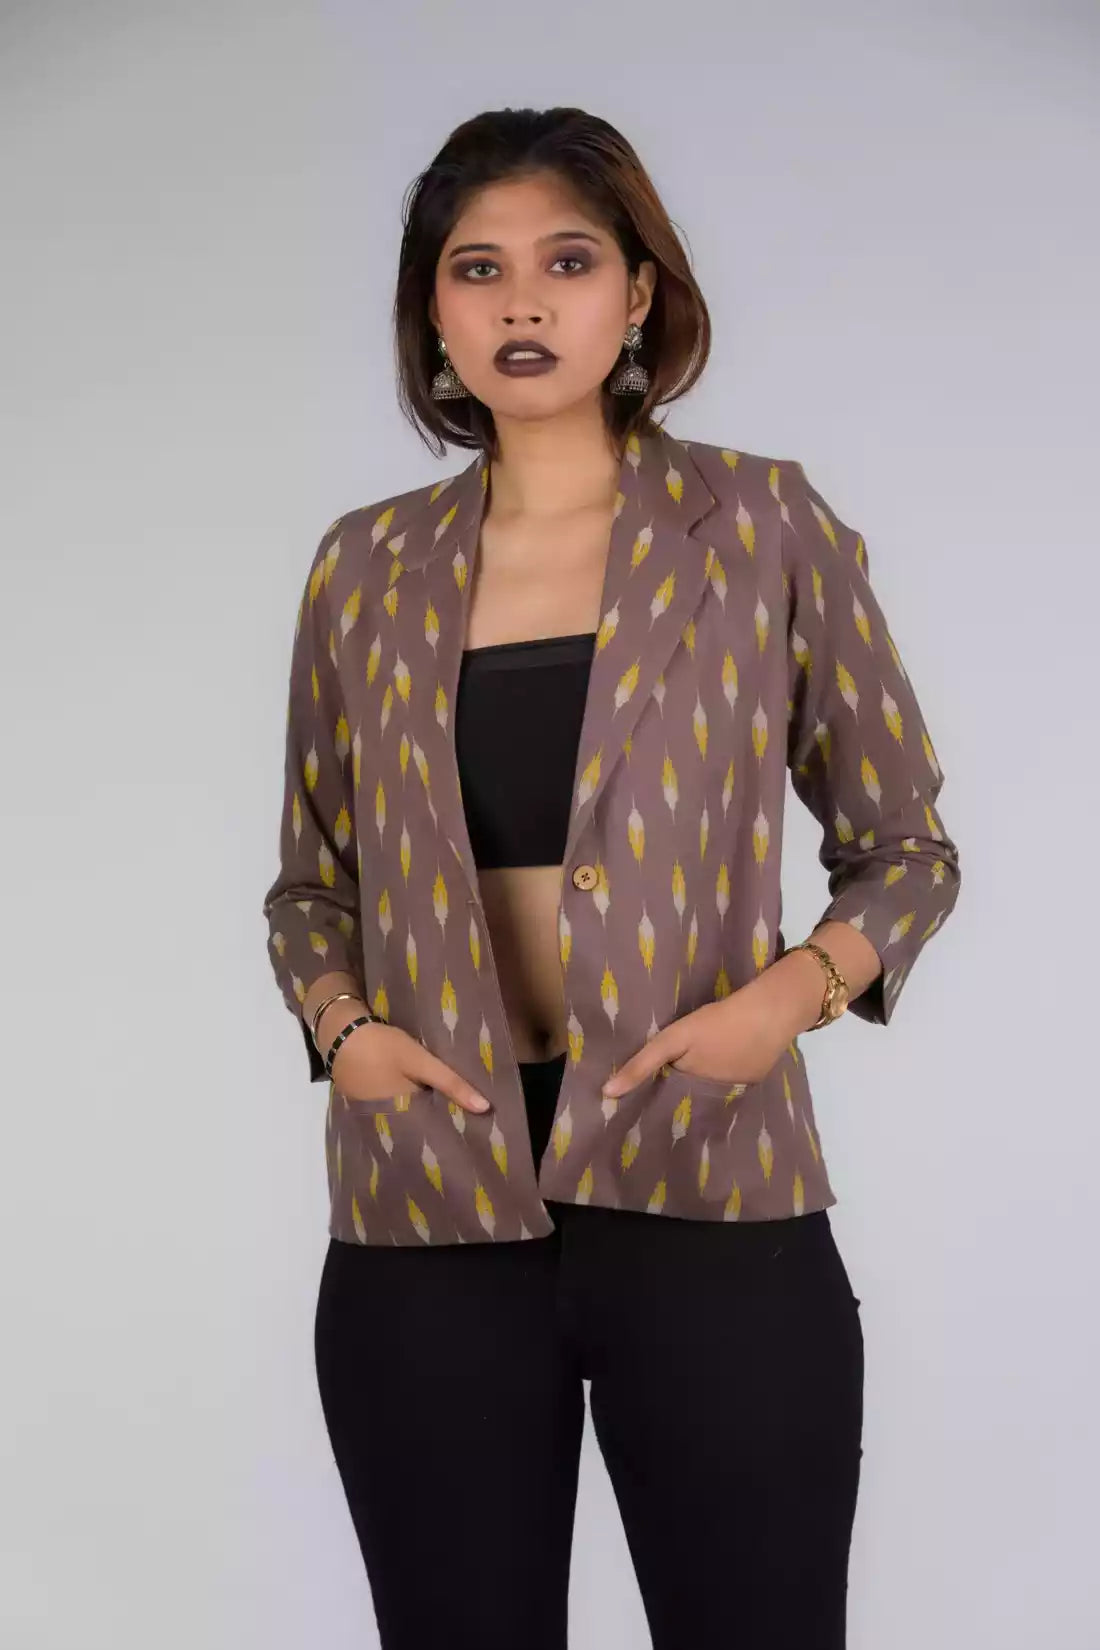 A Women in Grey Yellow Ikkat Blazer In Pure Cotton, womens workwear standing against a grey background